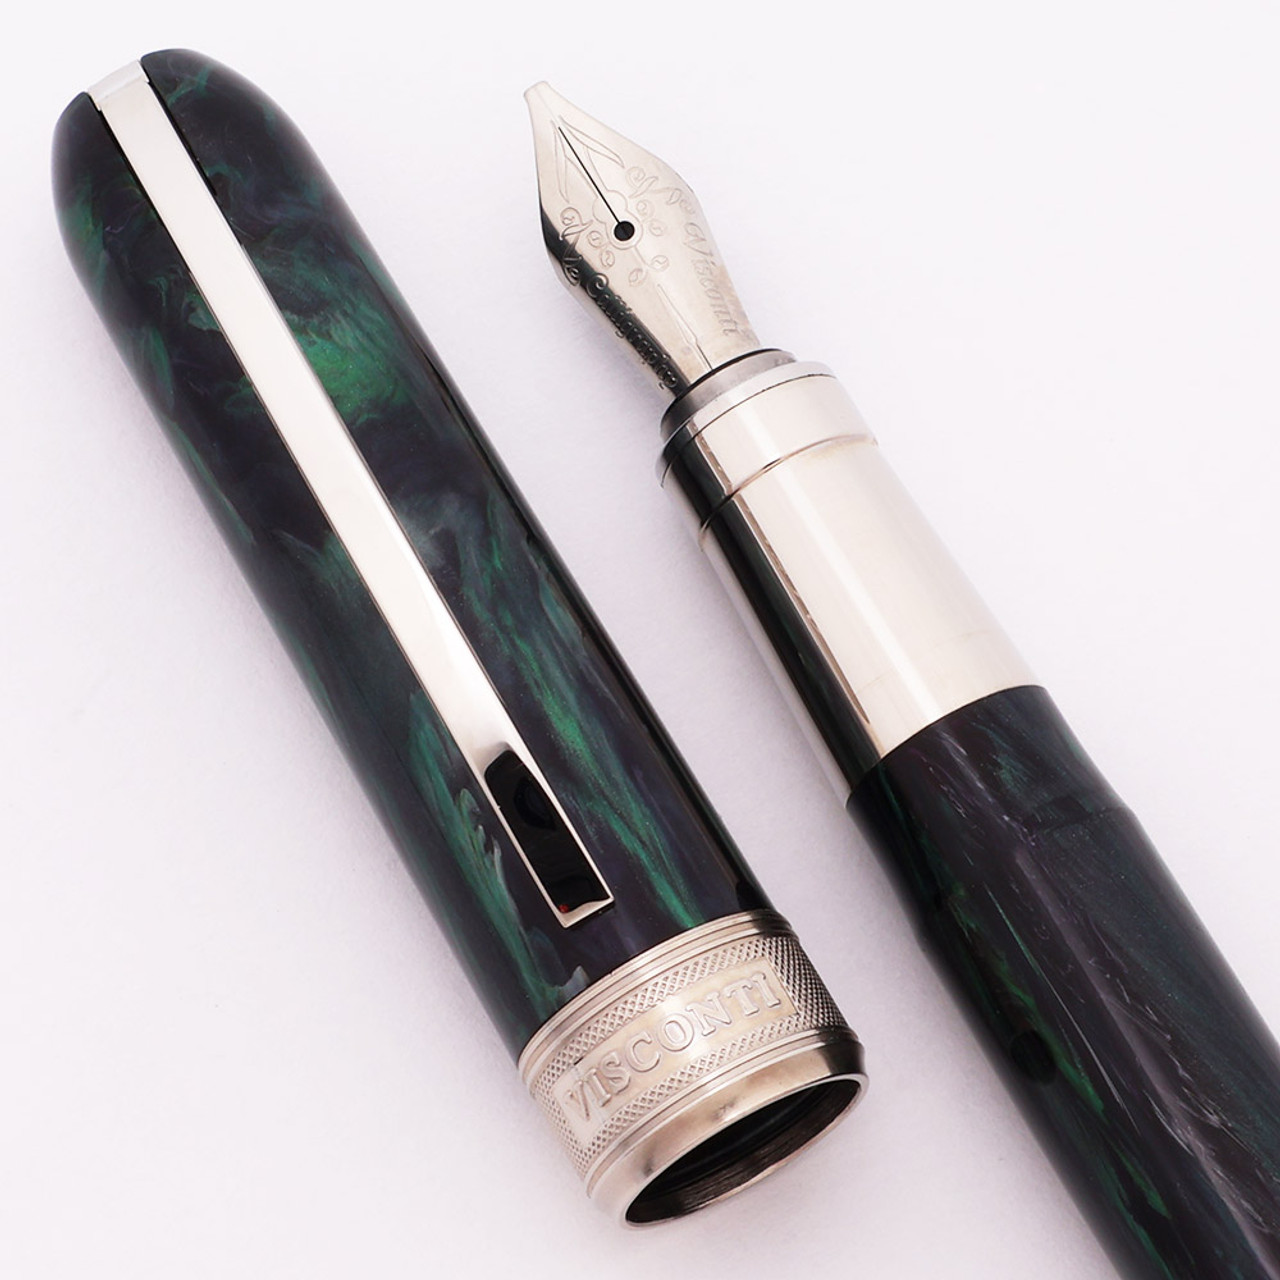 Visconti Rembrandt Fountain Pen - Dark Forest Variegated Resin, C/C, 1.5mm Stub Nib (Excellent +, Works Well)